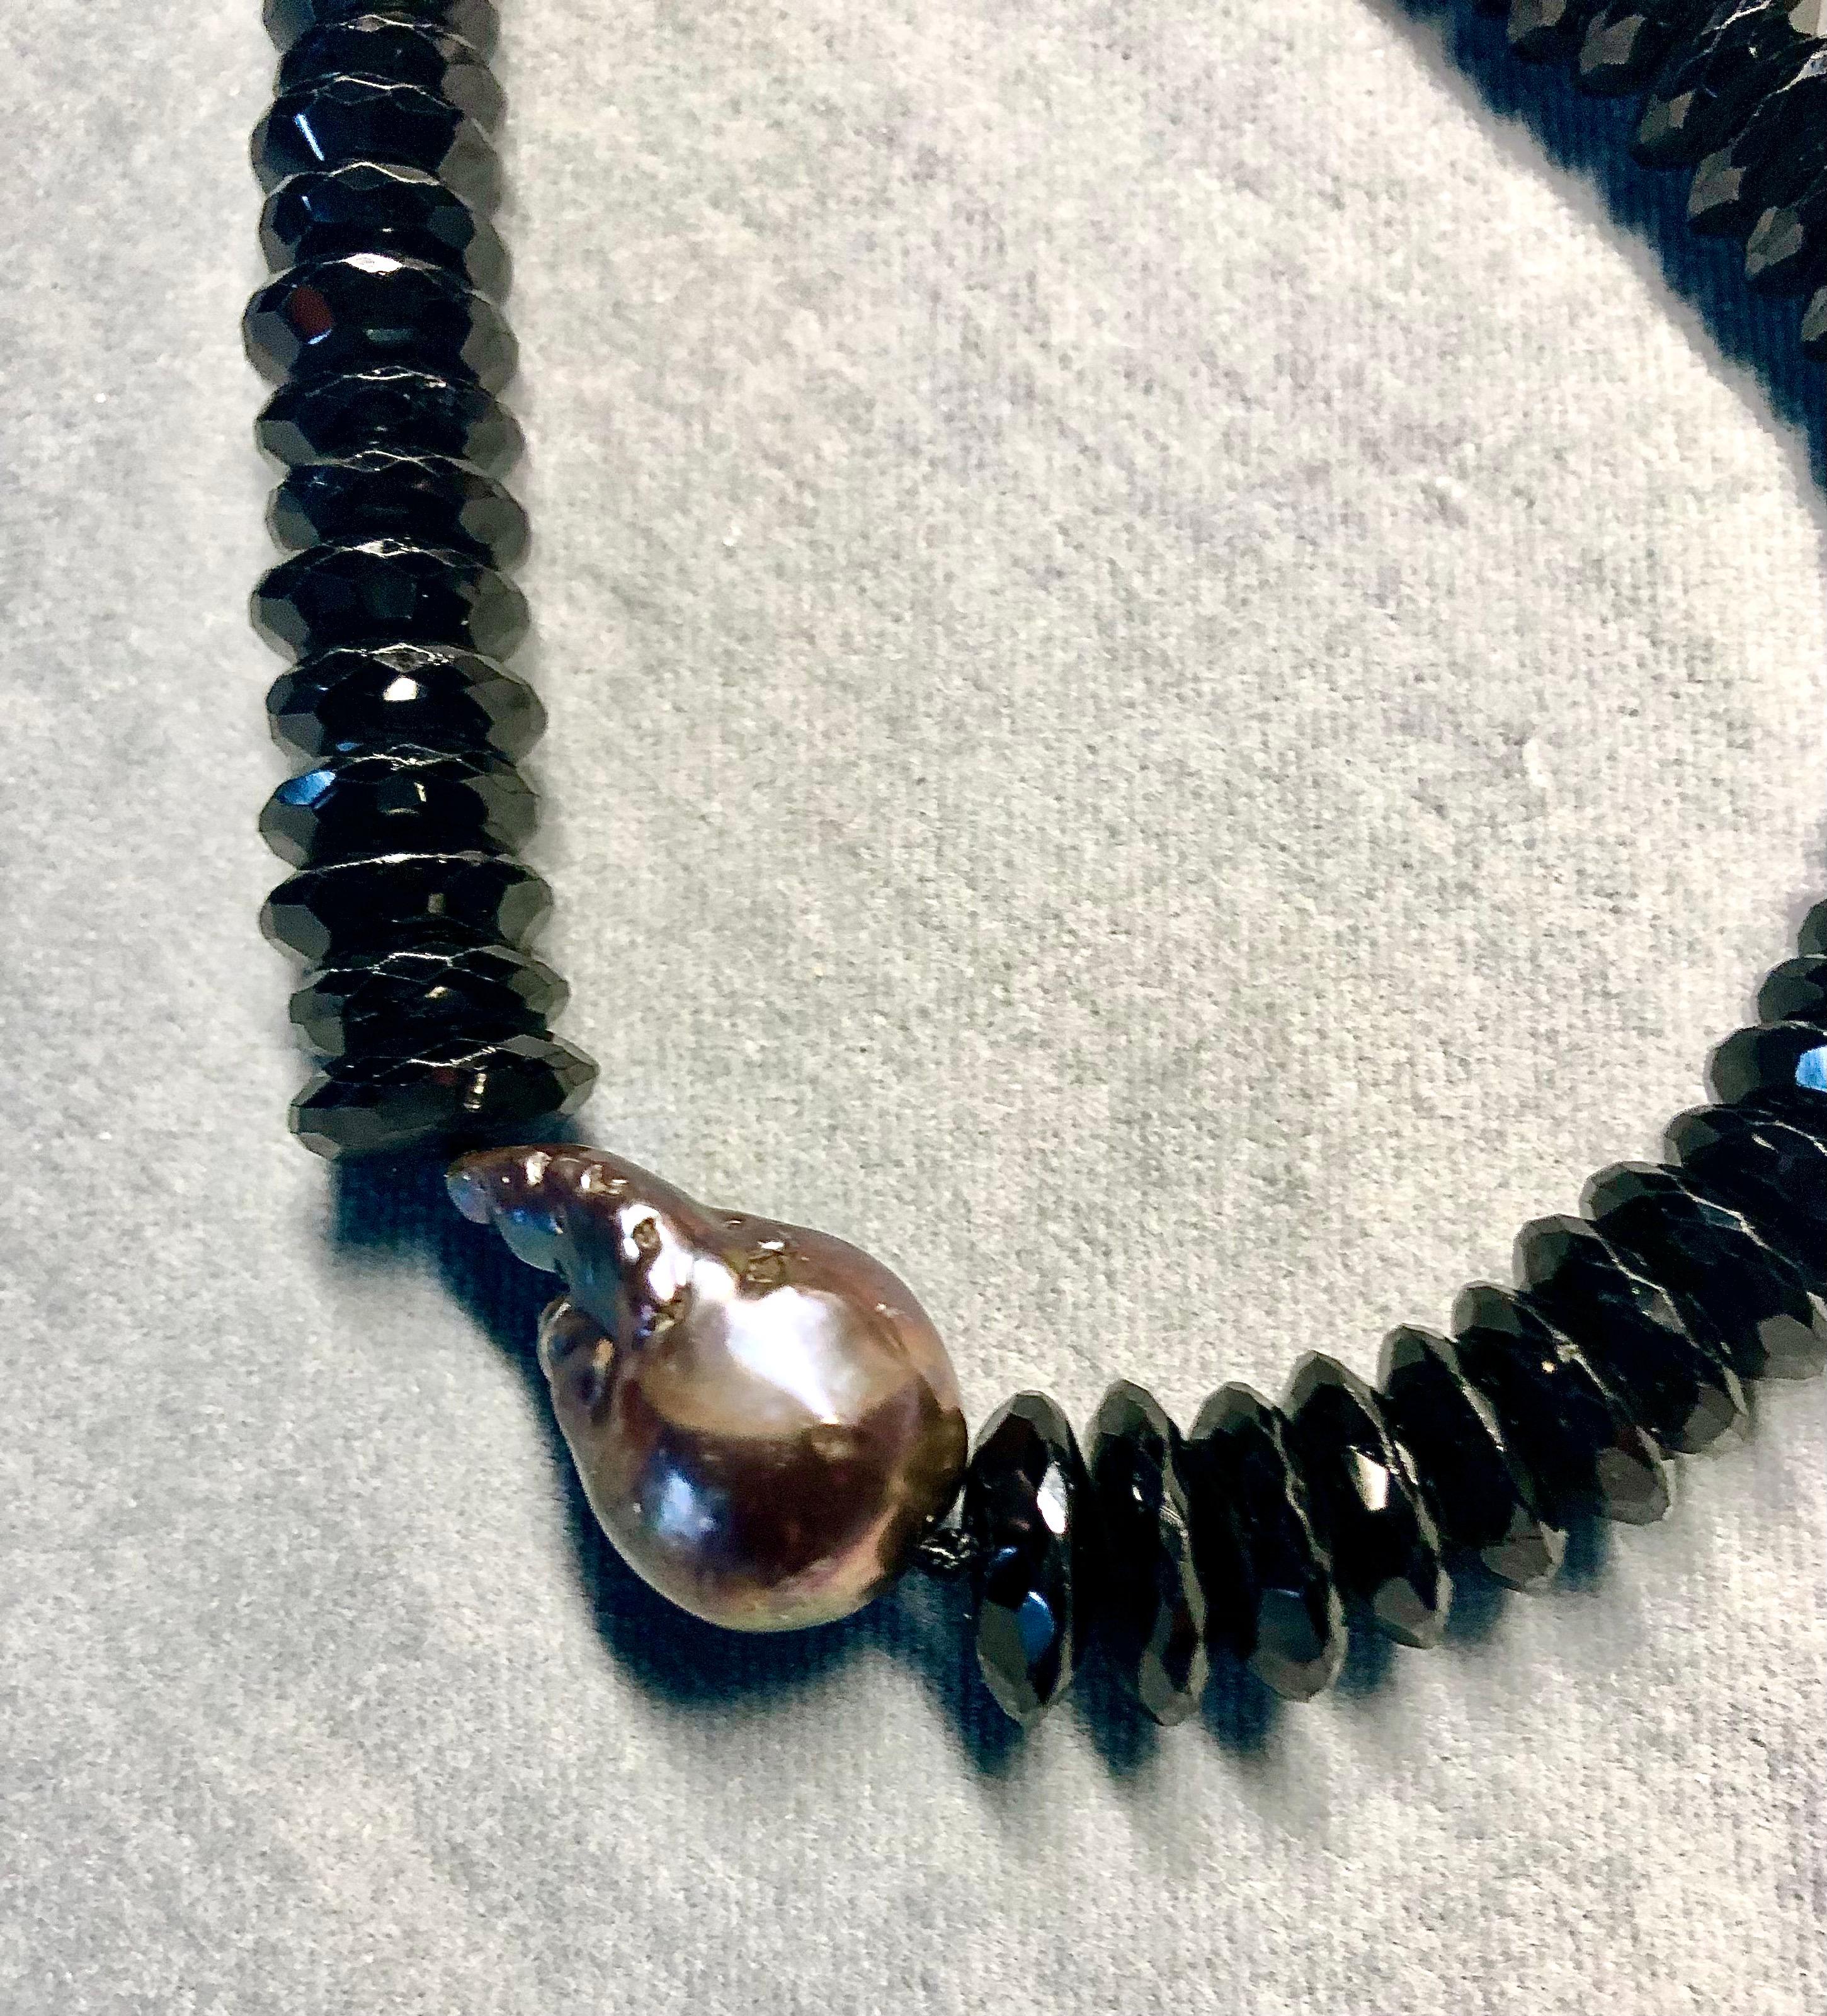 Single strand 18” necklace of very fine sharply defined German cut glistening black spinels 10.5-8.25 mm.
Center focal point is a large freshwater cultured, highly lustrous grey pearl with mauve and green under tones. Finished with a gunmetal color